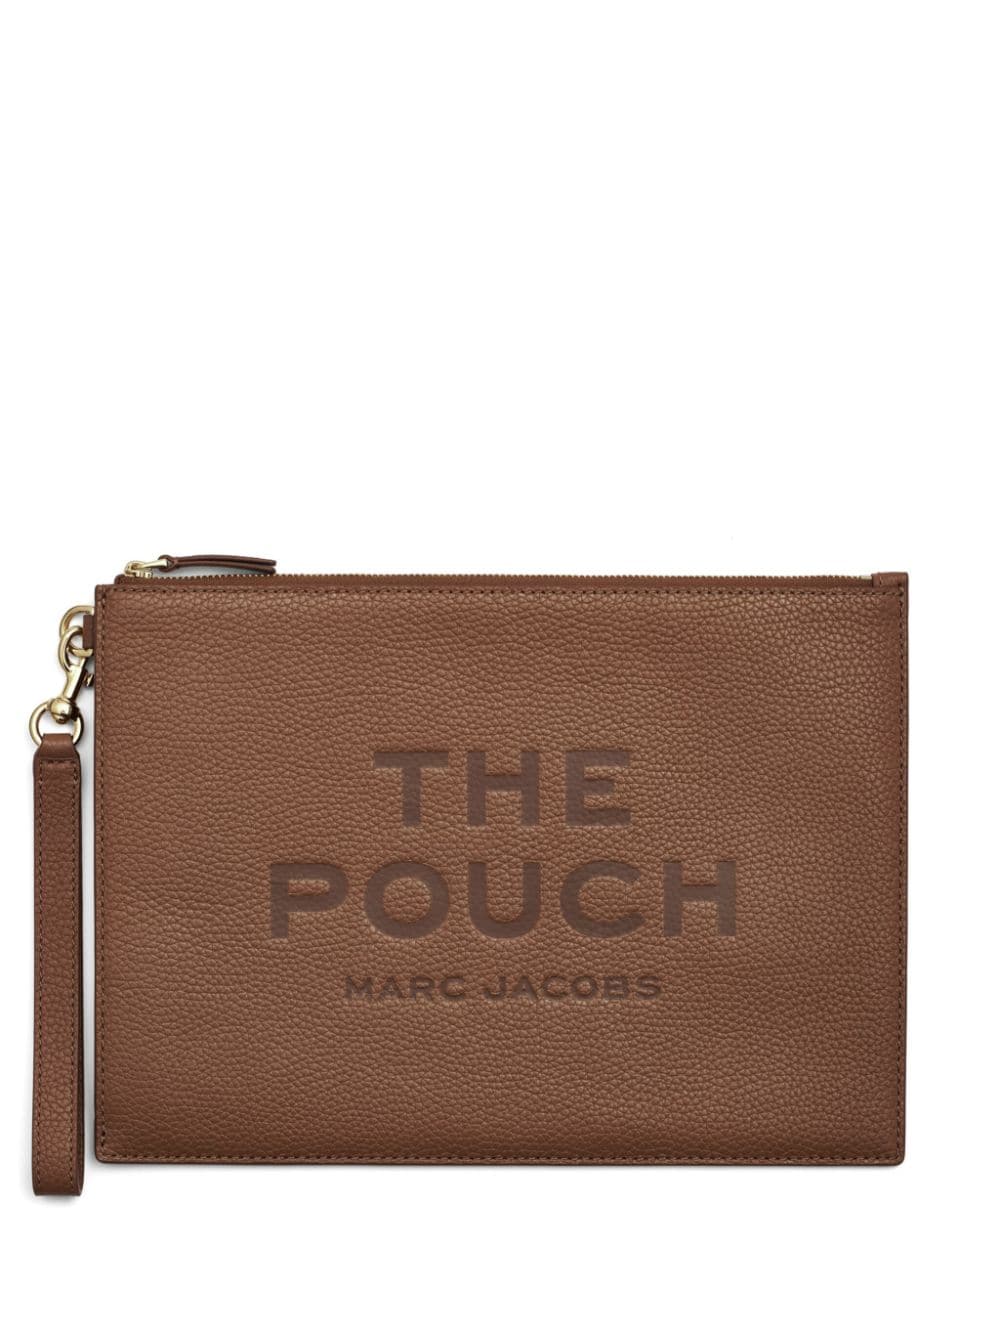 POUCH THE LARGE CAMEL LOGO...